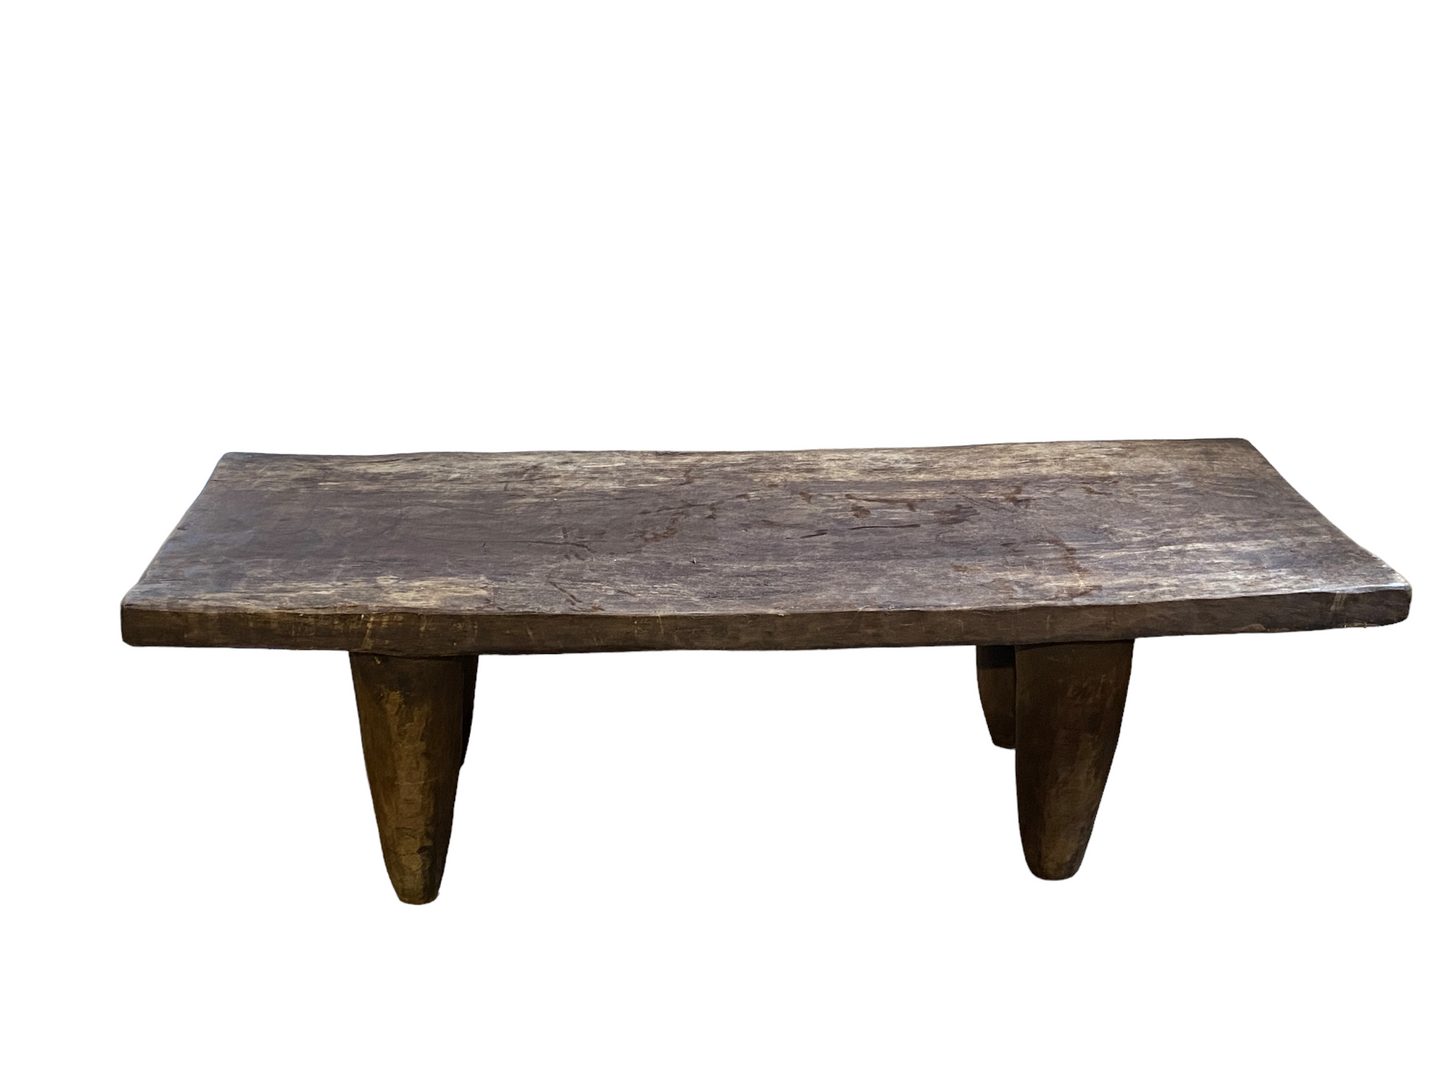 #4981 Senufo Old Rustic Coffee Table / Stool Cote d'Ivoire 43" W